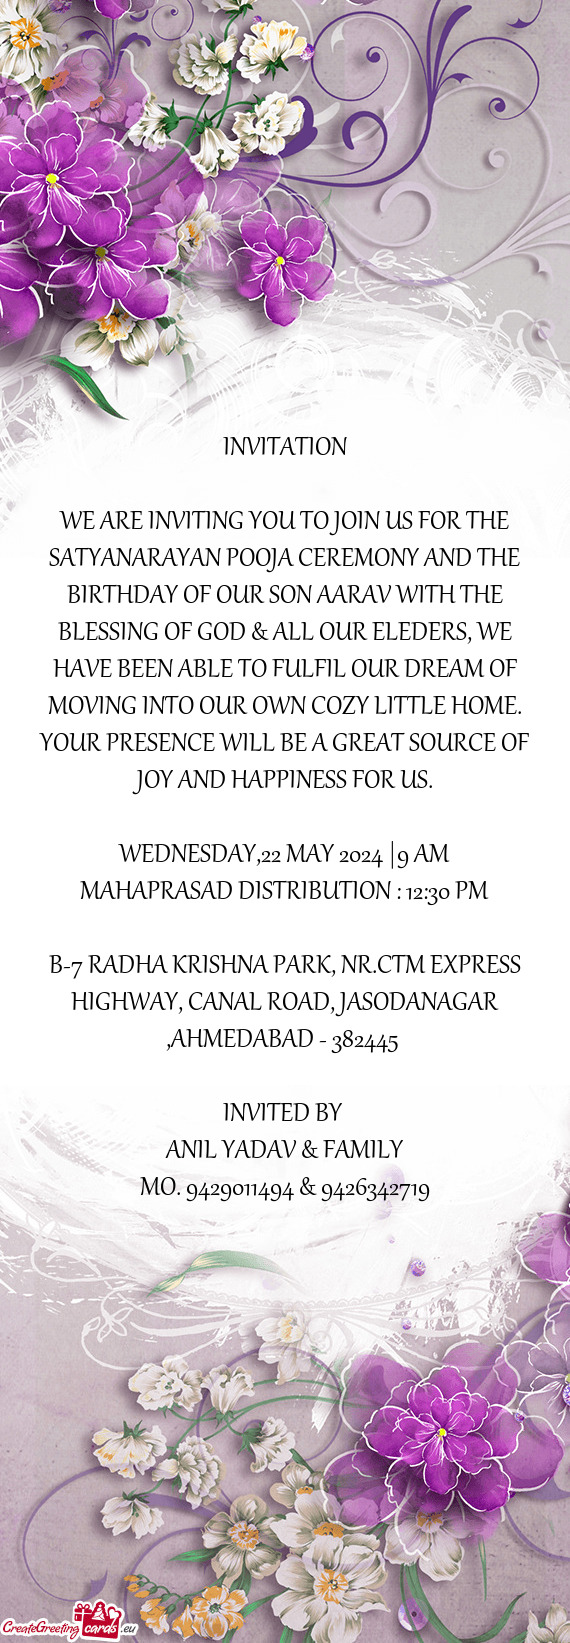 WE ARE INVITING YOU TO JOIN US FOR THE SATYANARAYAN POOJA CEREMONY AND THE BIRTHDAY OF OUR SON AARAV